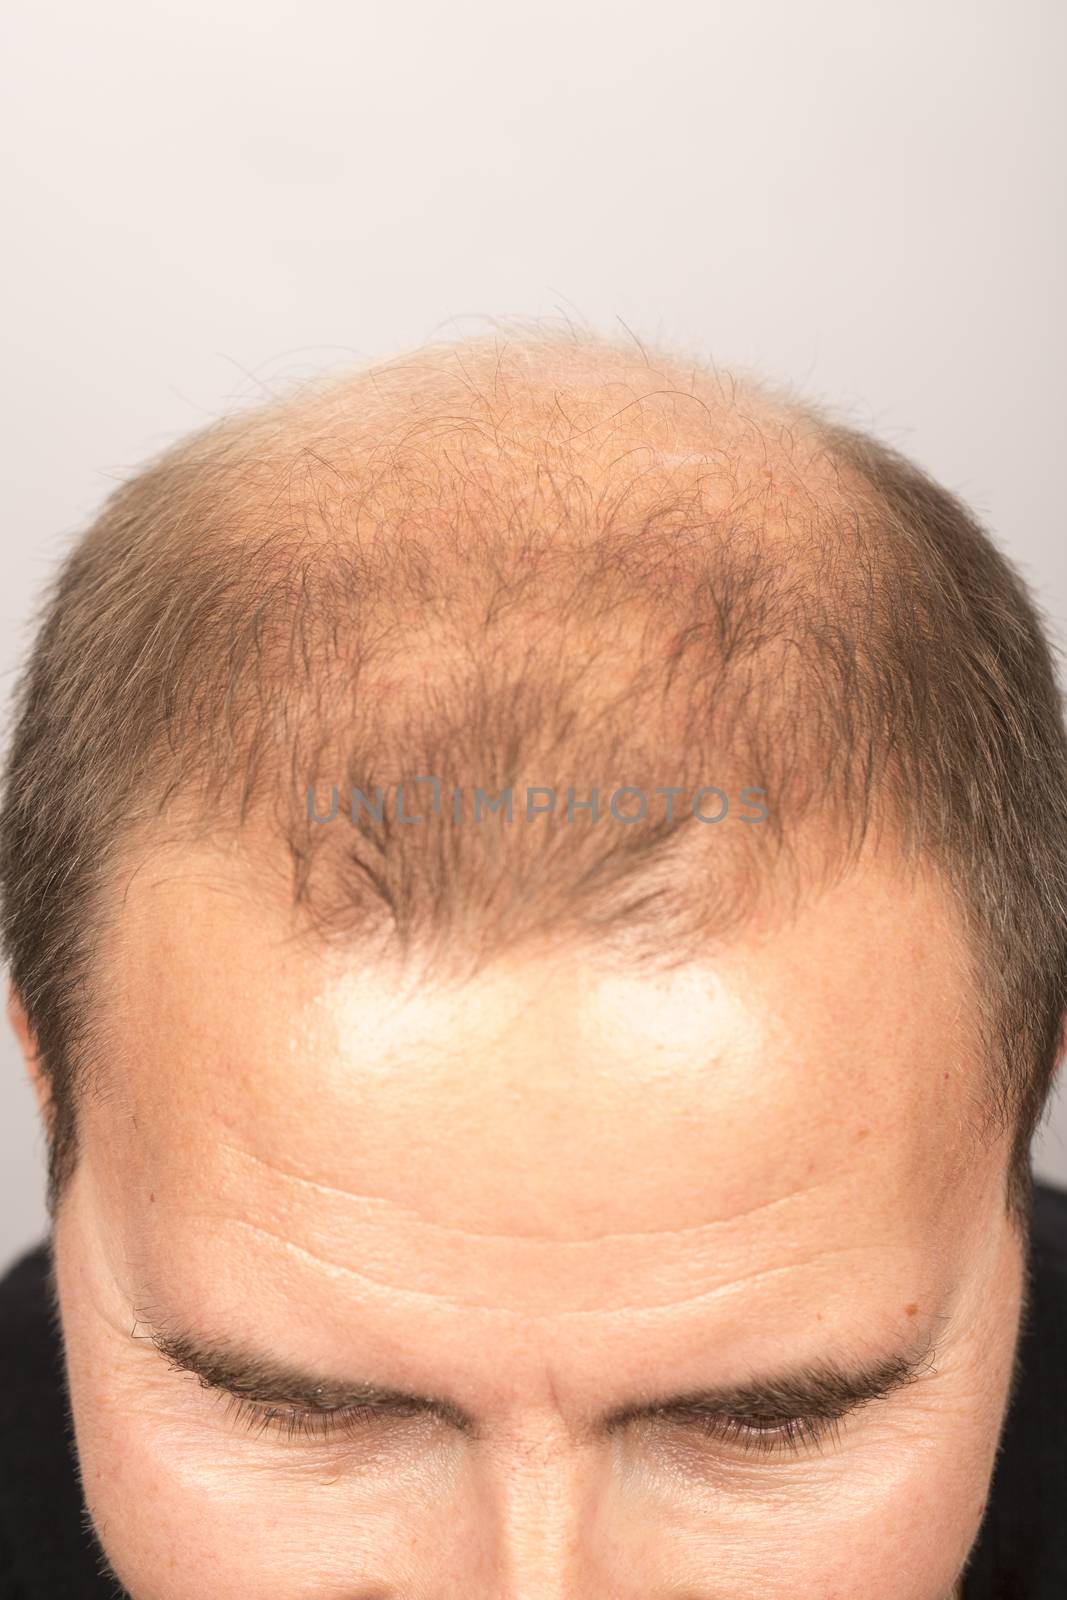 man controls hair loss by CatherineL-Prod